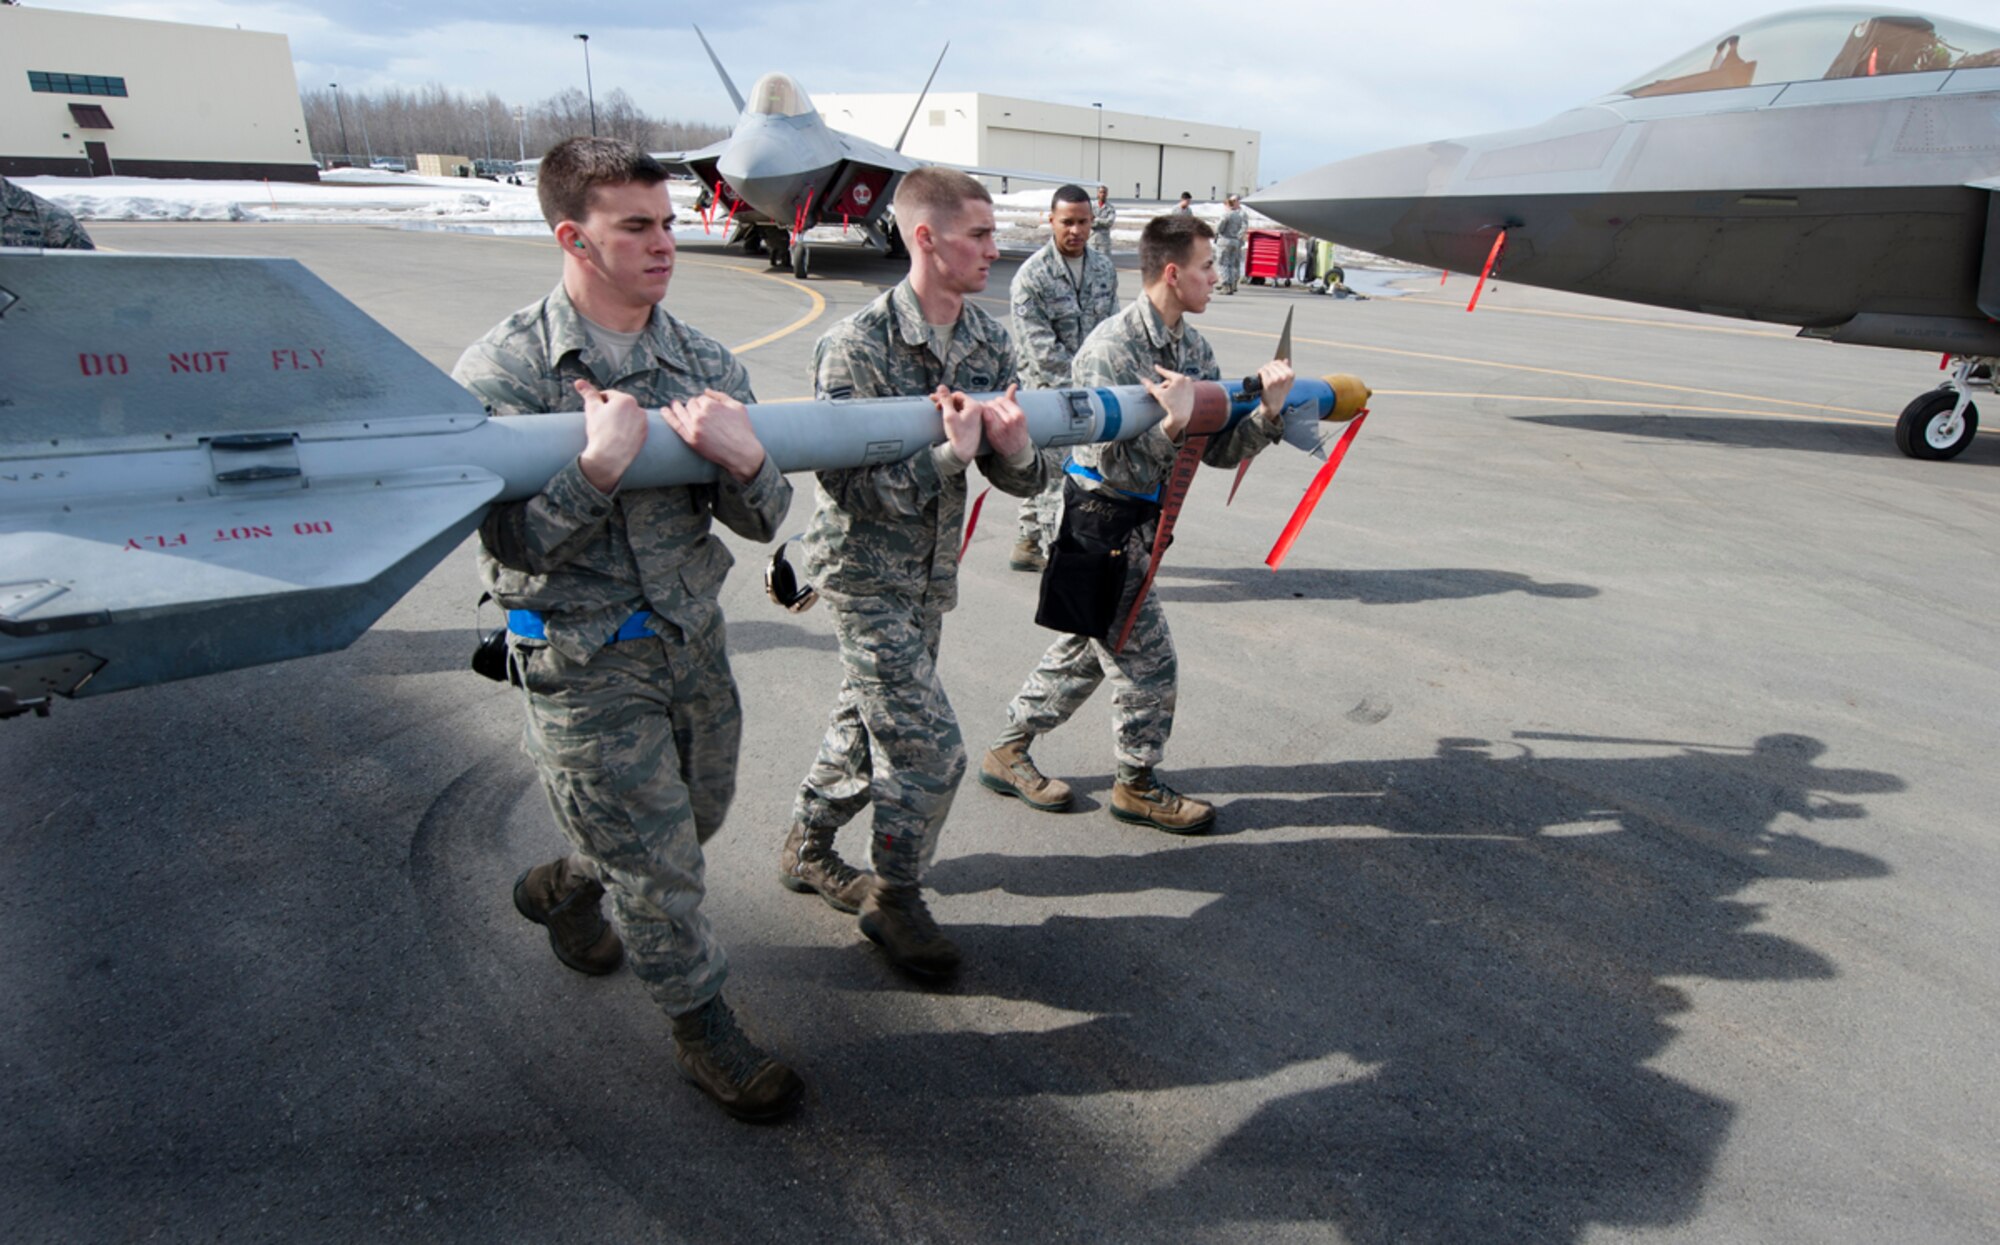 A load crew team from the 525th Aircraft Maintainence Unit carries an AIM-120 Sidewinder missile during a 3rd Maintenance Group load crew competition at Joint Base Elmendorf-Richardson, Alaska, April 18, 2014. The 90th and 525th aircraft maintenance units train regularly to be proficient at their jobs, including competing in quarterly loading competitions. (U.S. Air Force photo/Staff Sgt. Robert Barnett)